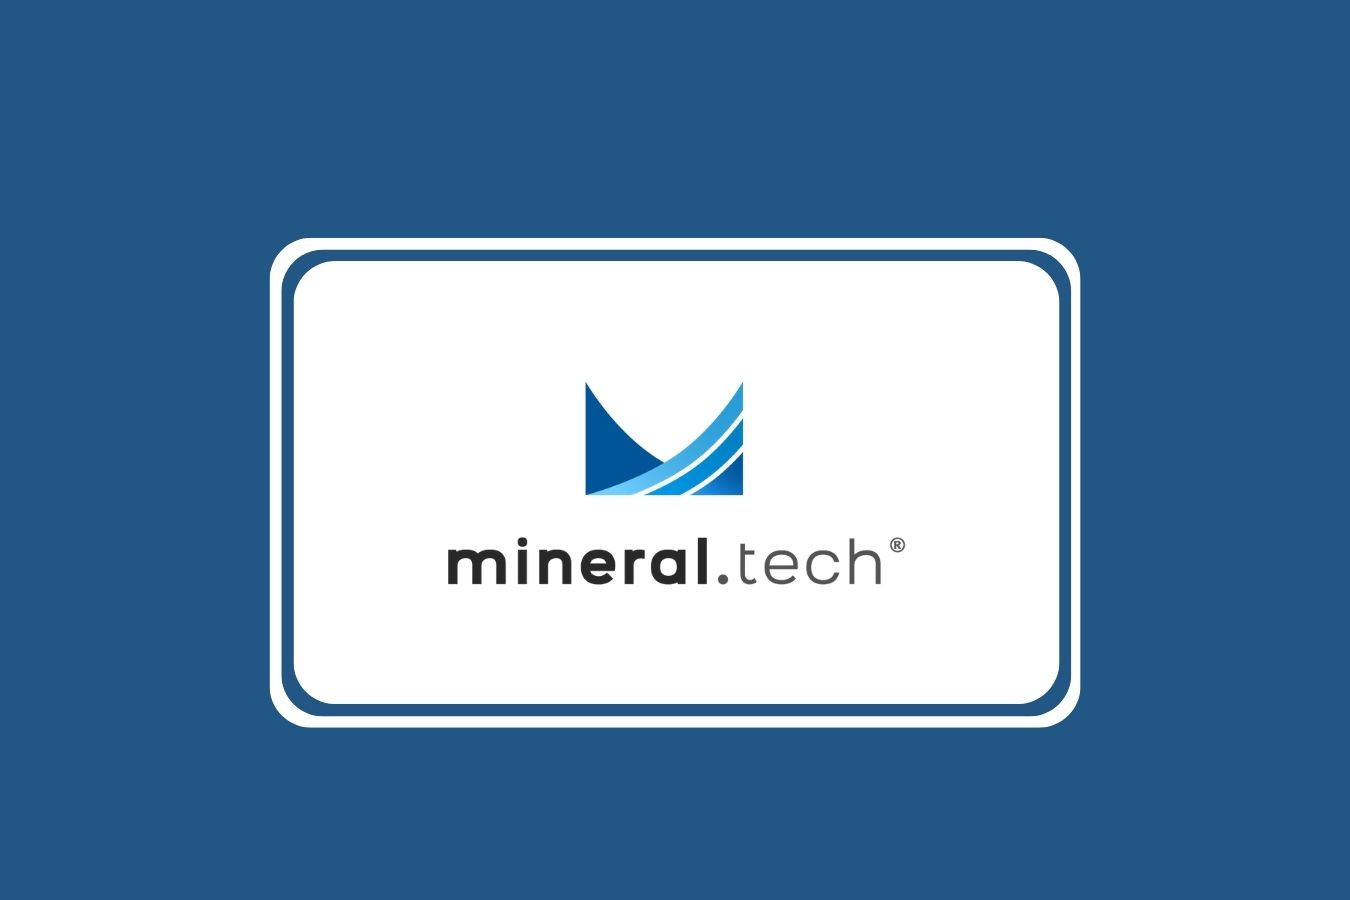 Organize your inventory of mineral assets